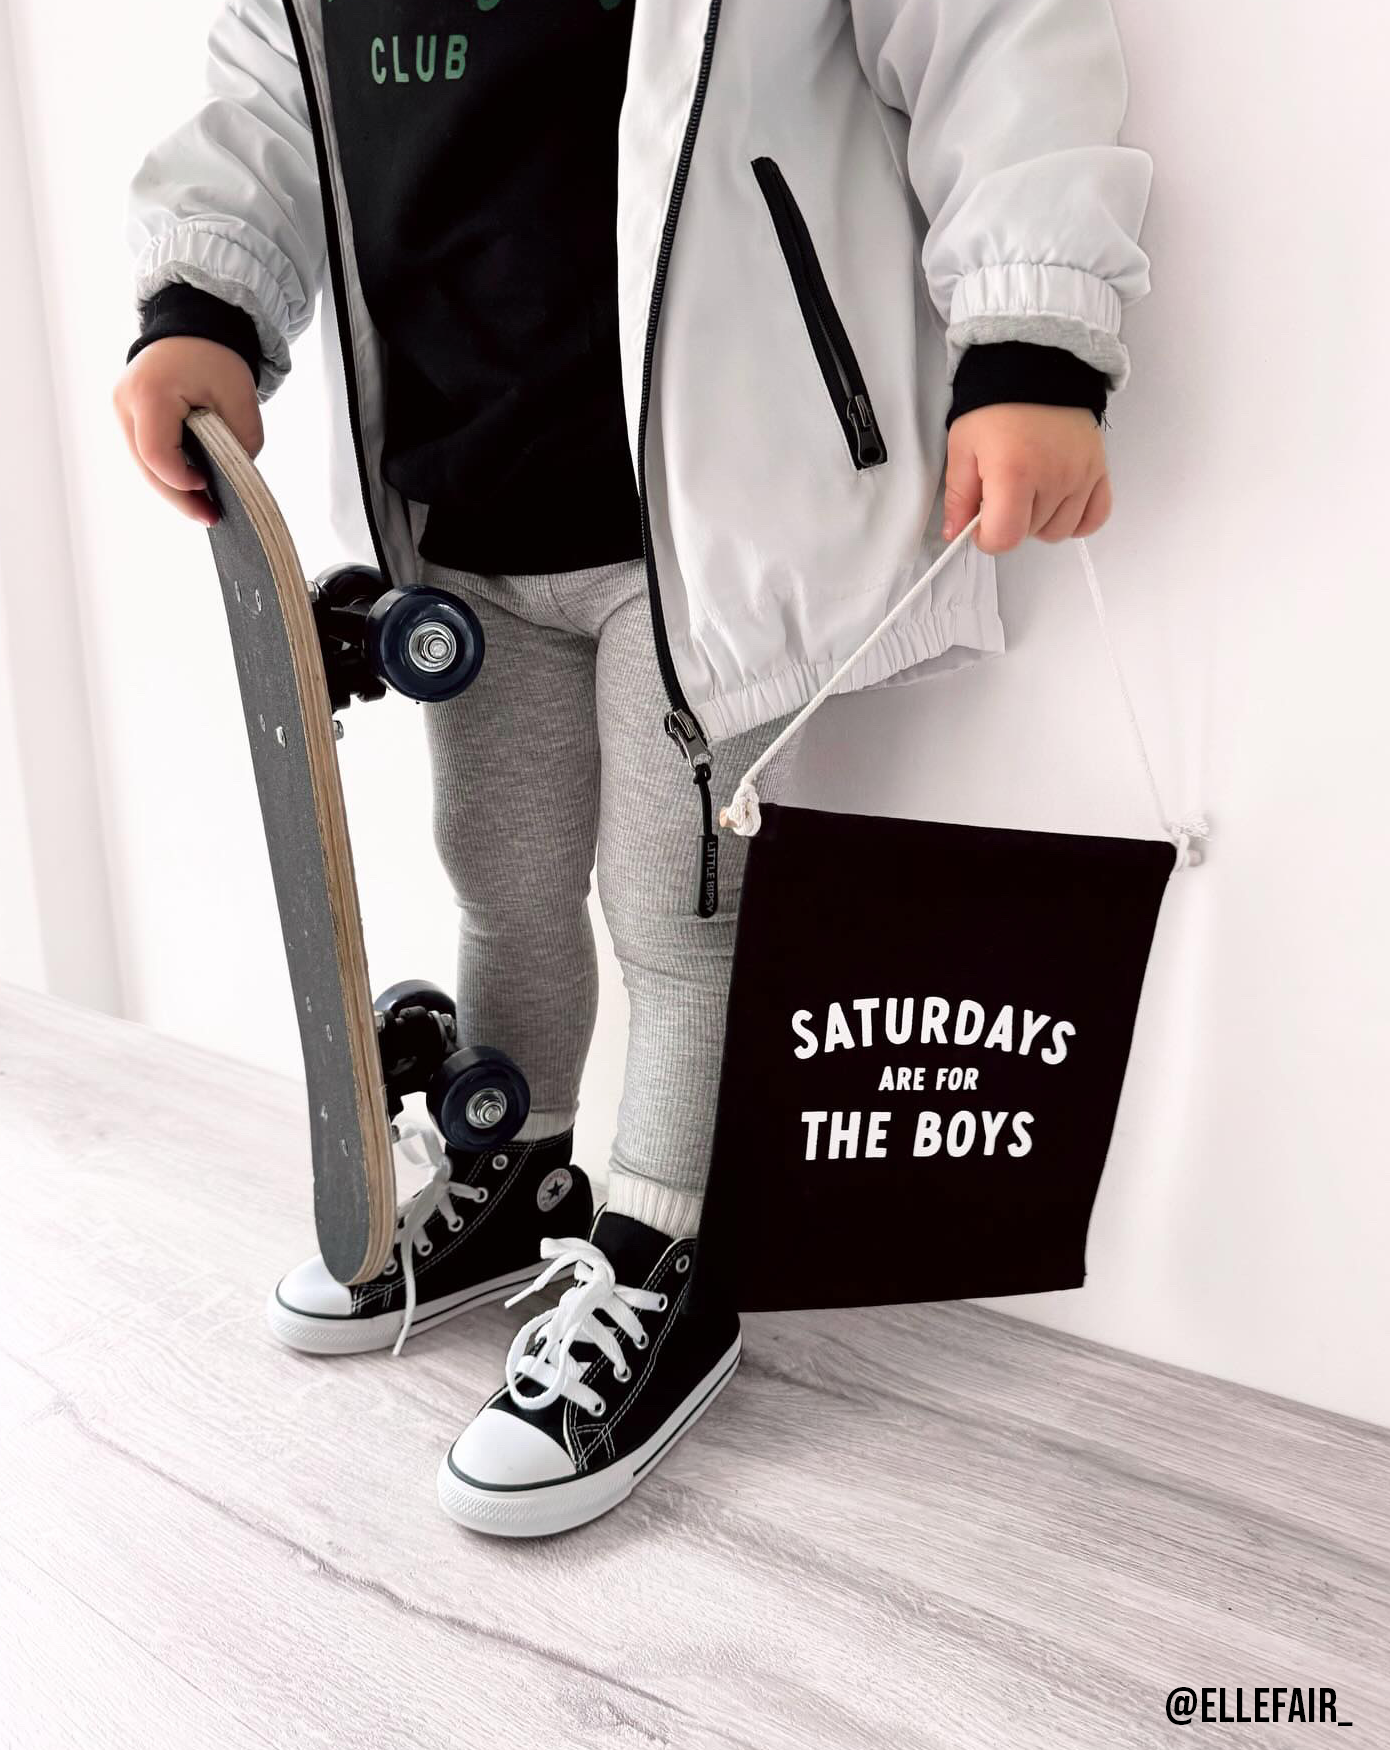 Saturdays Are For The Boys (Black) Canvas Hang Sign